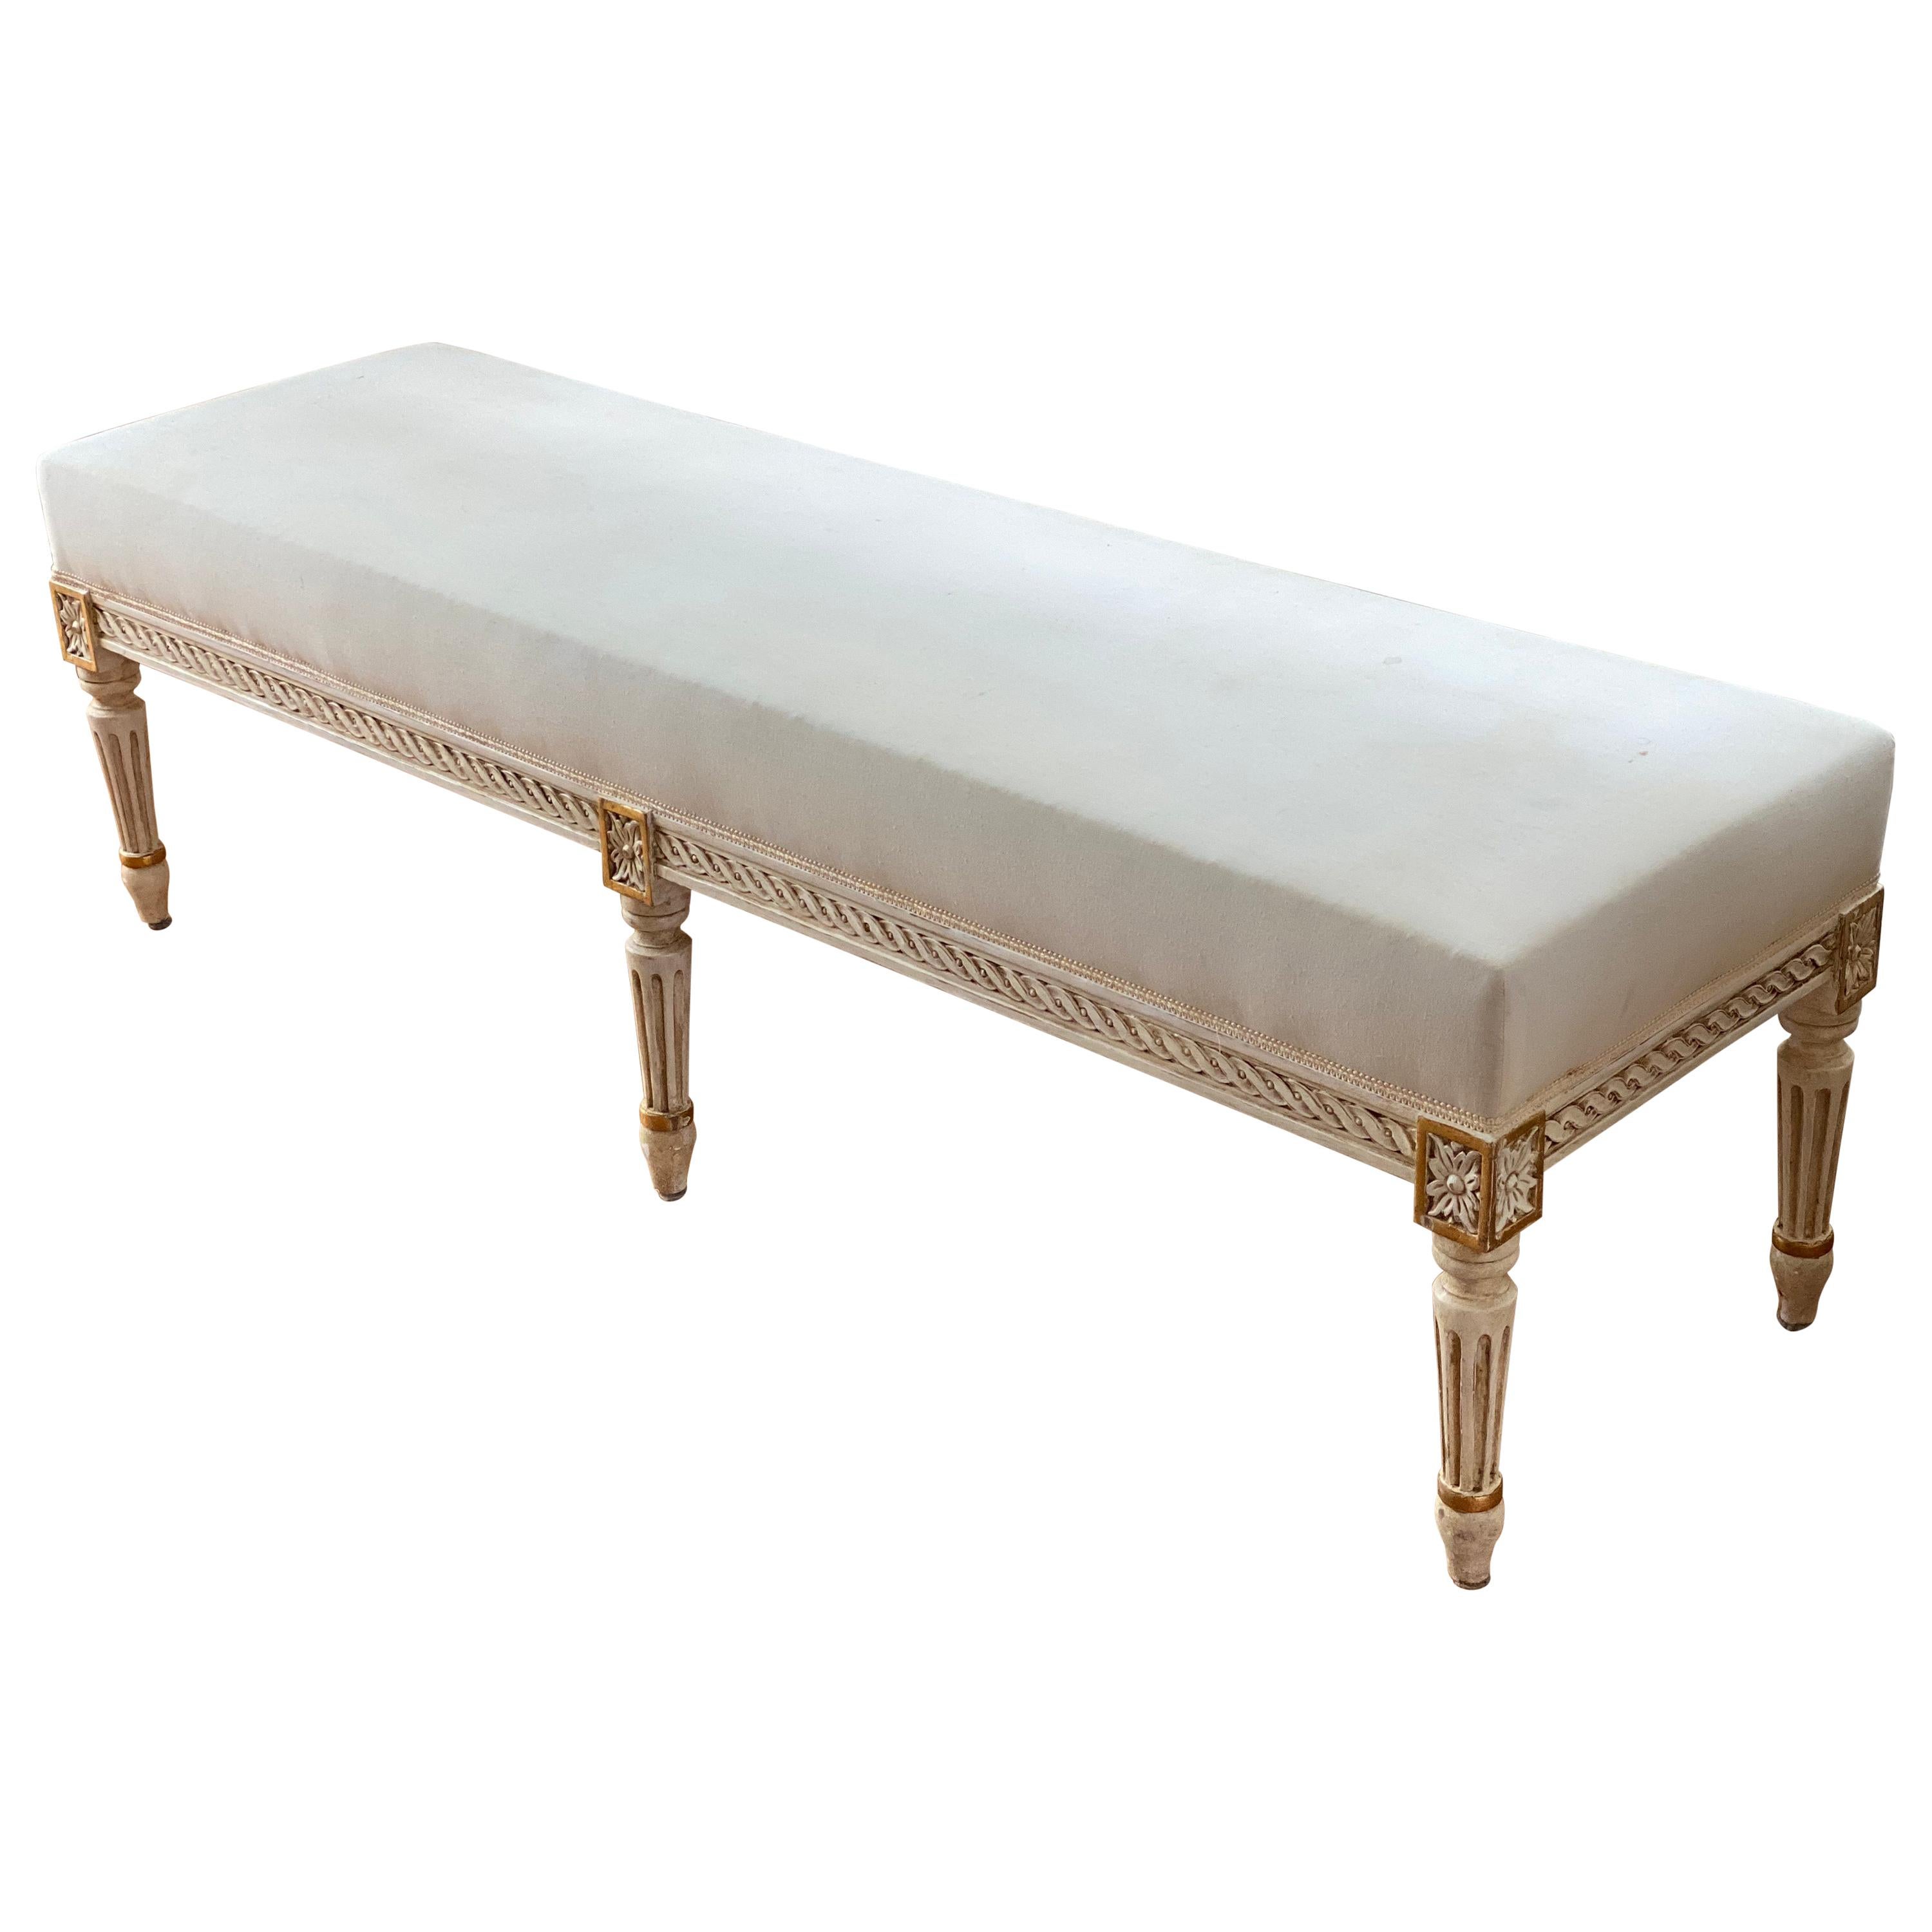 Louis XVI Style Painted and Parcel-Gilt Banquette/Bench, Early 20th Century